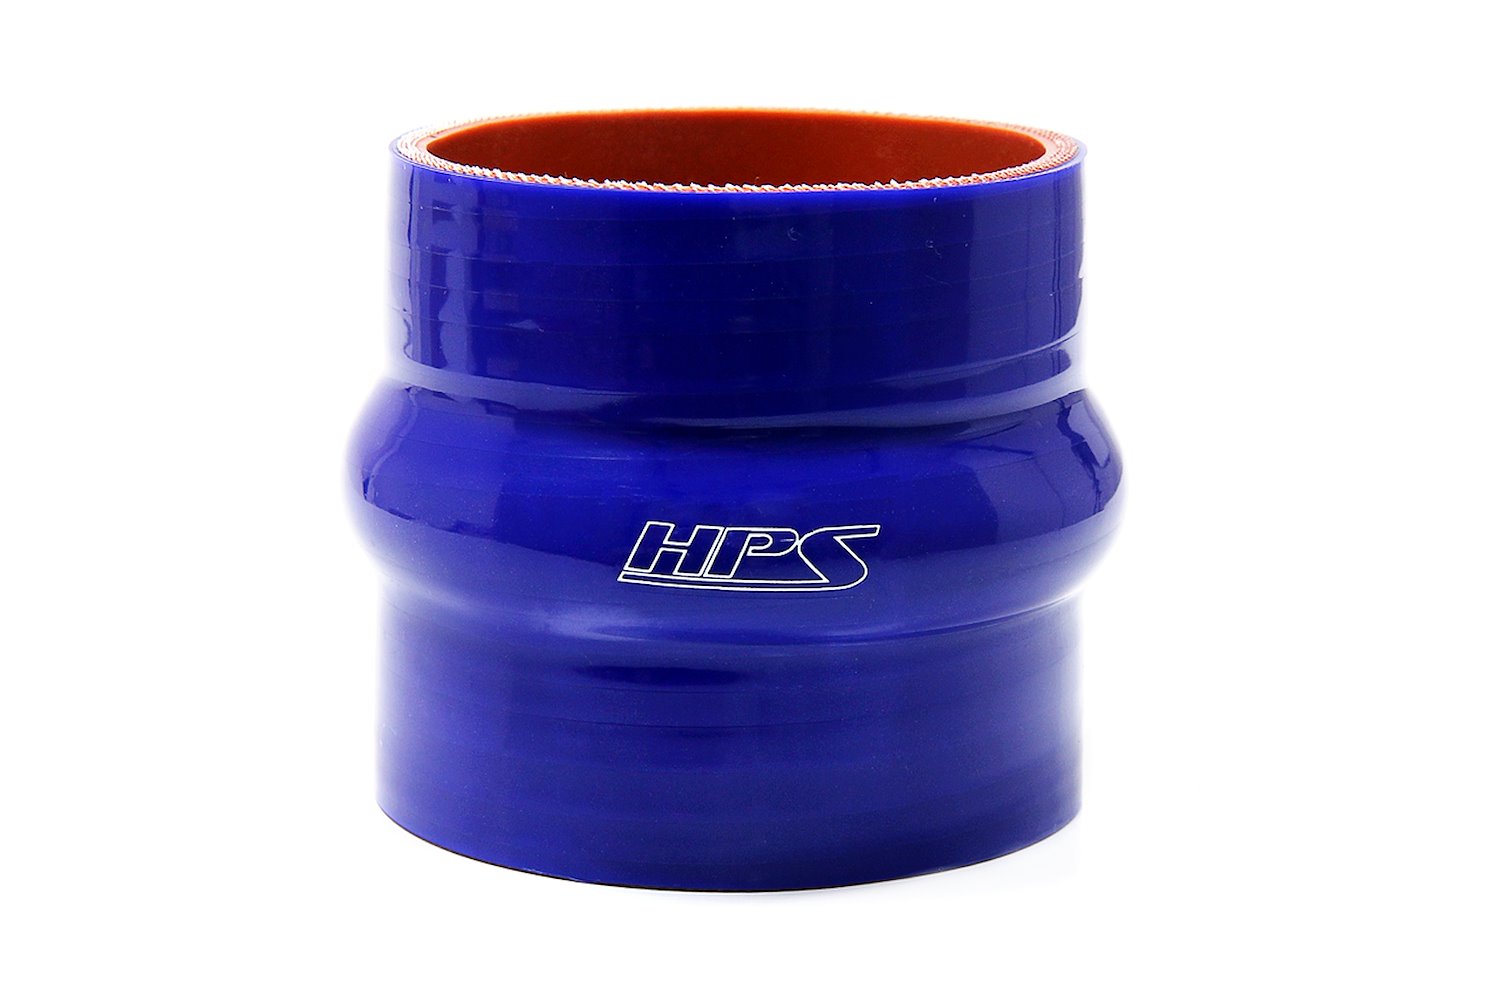 HTSHC-175-BLUE Silicone Hump Coupler Hose, High-Temp 4-Ply Reinforced, 1-3/4 in. ID, 3 in. Long, Blue